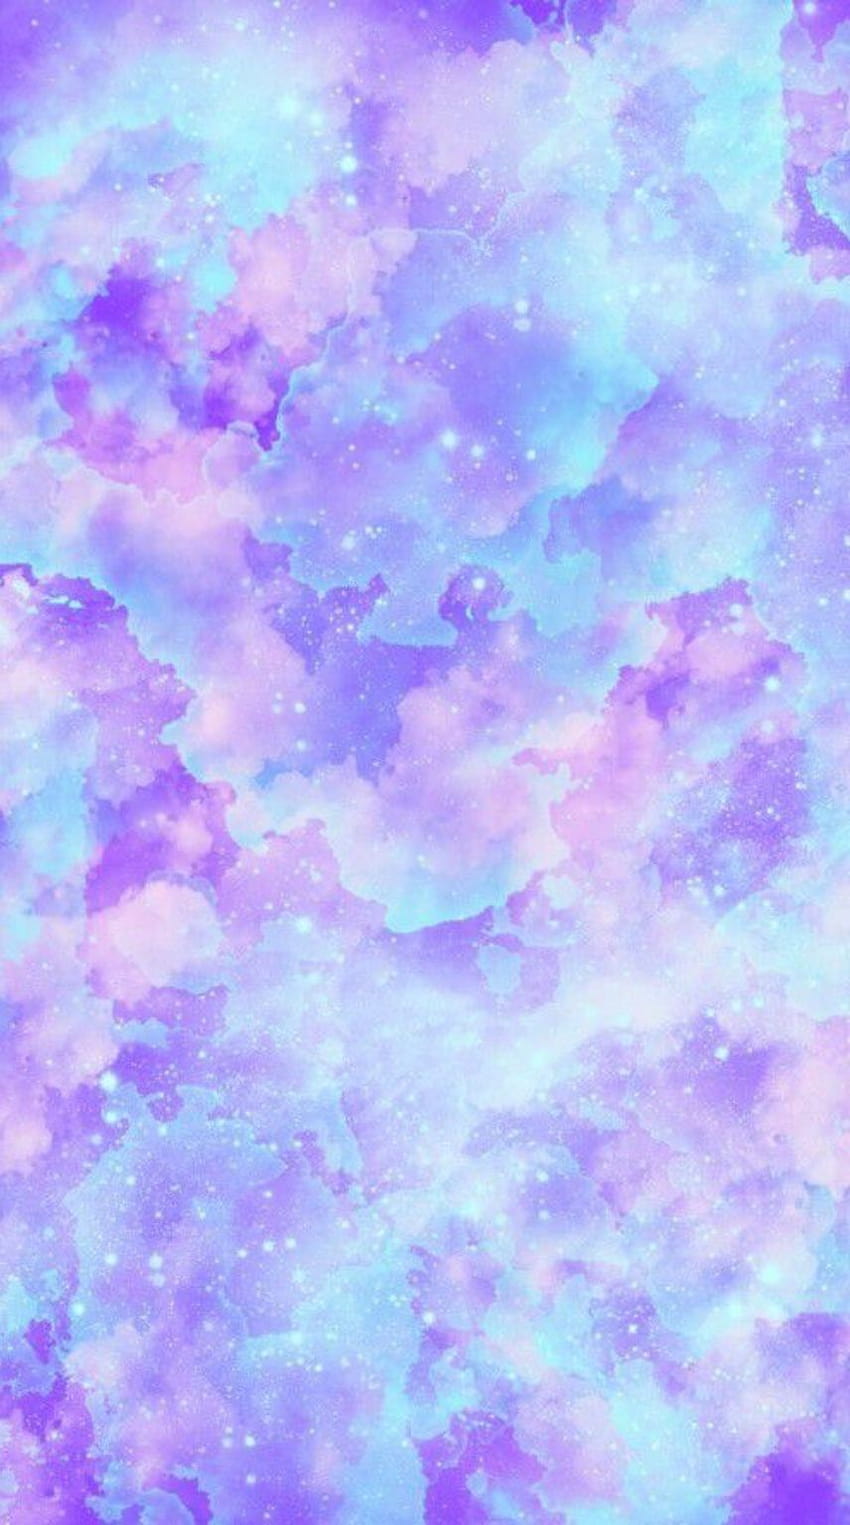 100 Free Purple Aesthetic Wallpaper Backgrounds Perfect For Your iPhone